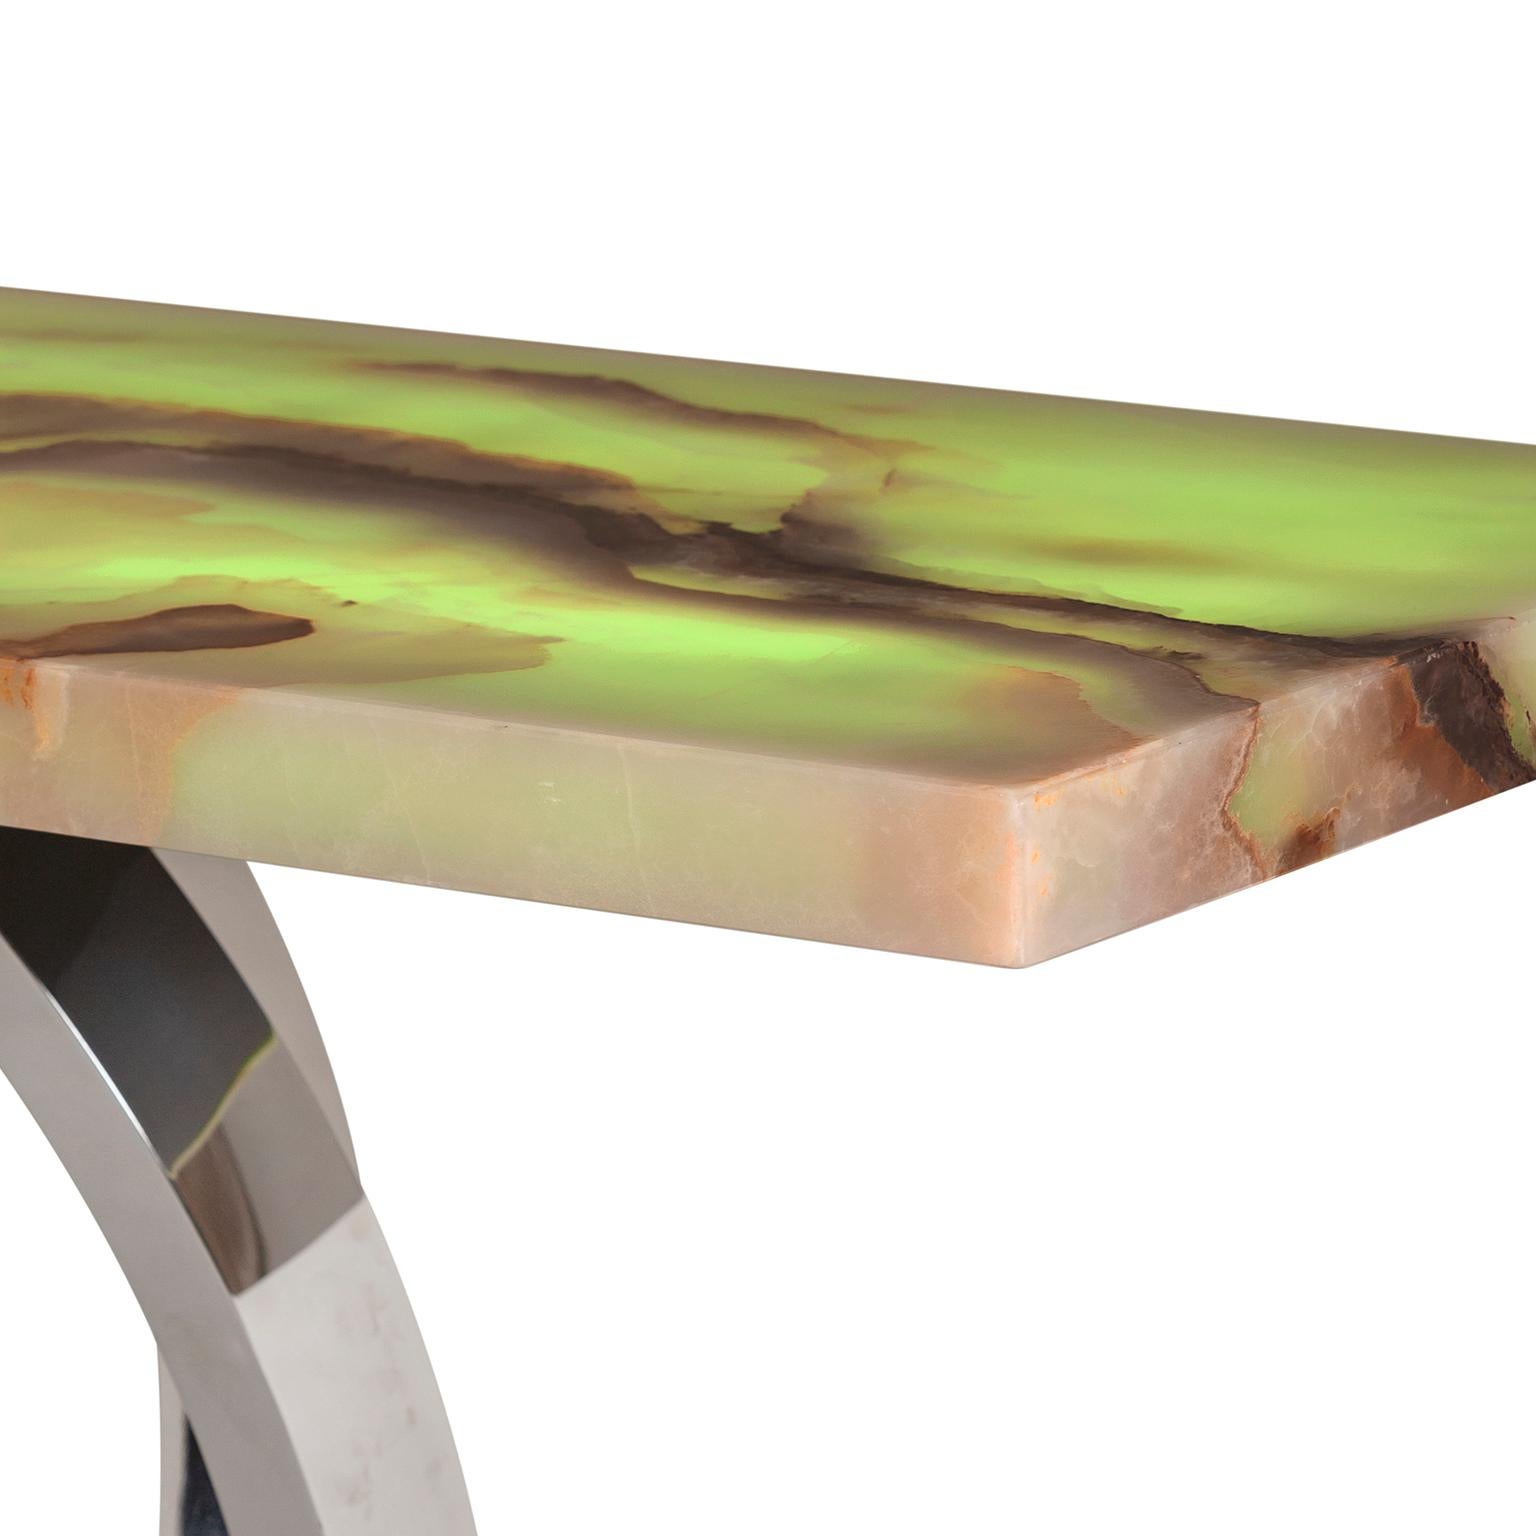 Modern Art Deco Armilar Console Table Onyx Stainless Steel Handmade Portugal Greenapple For Sale